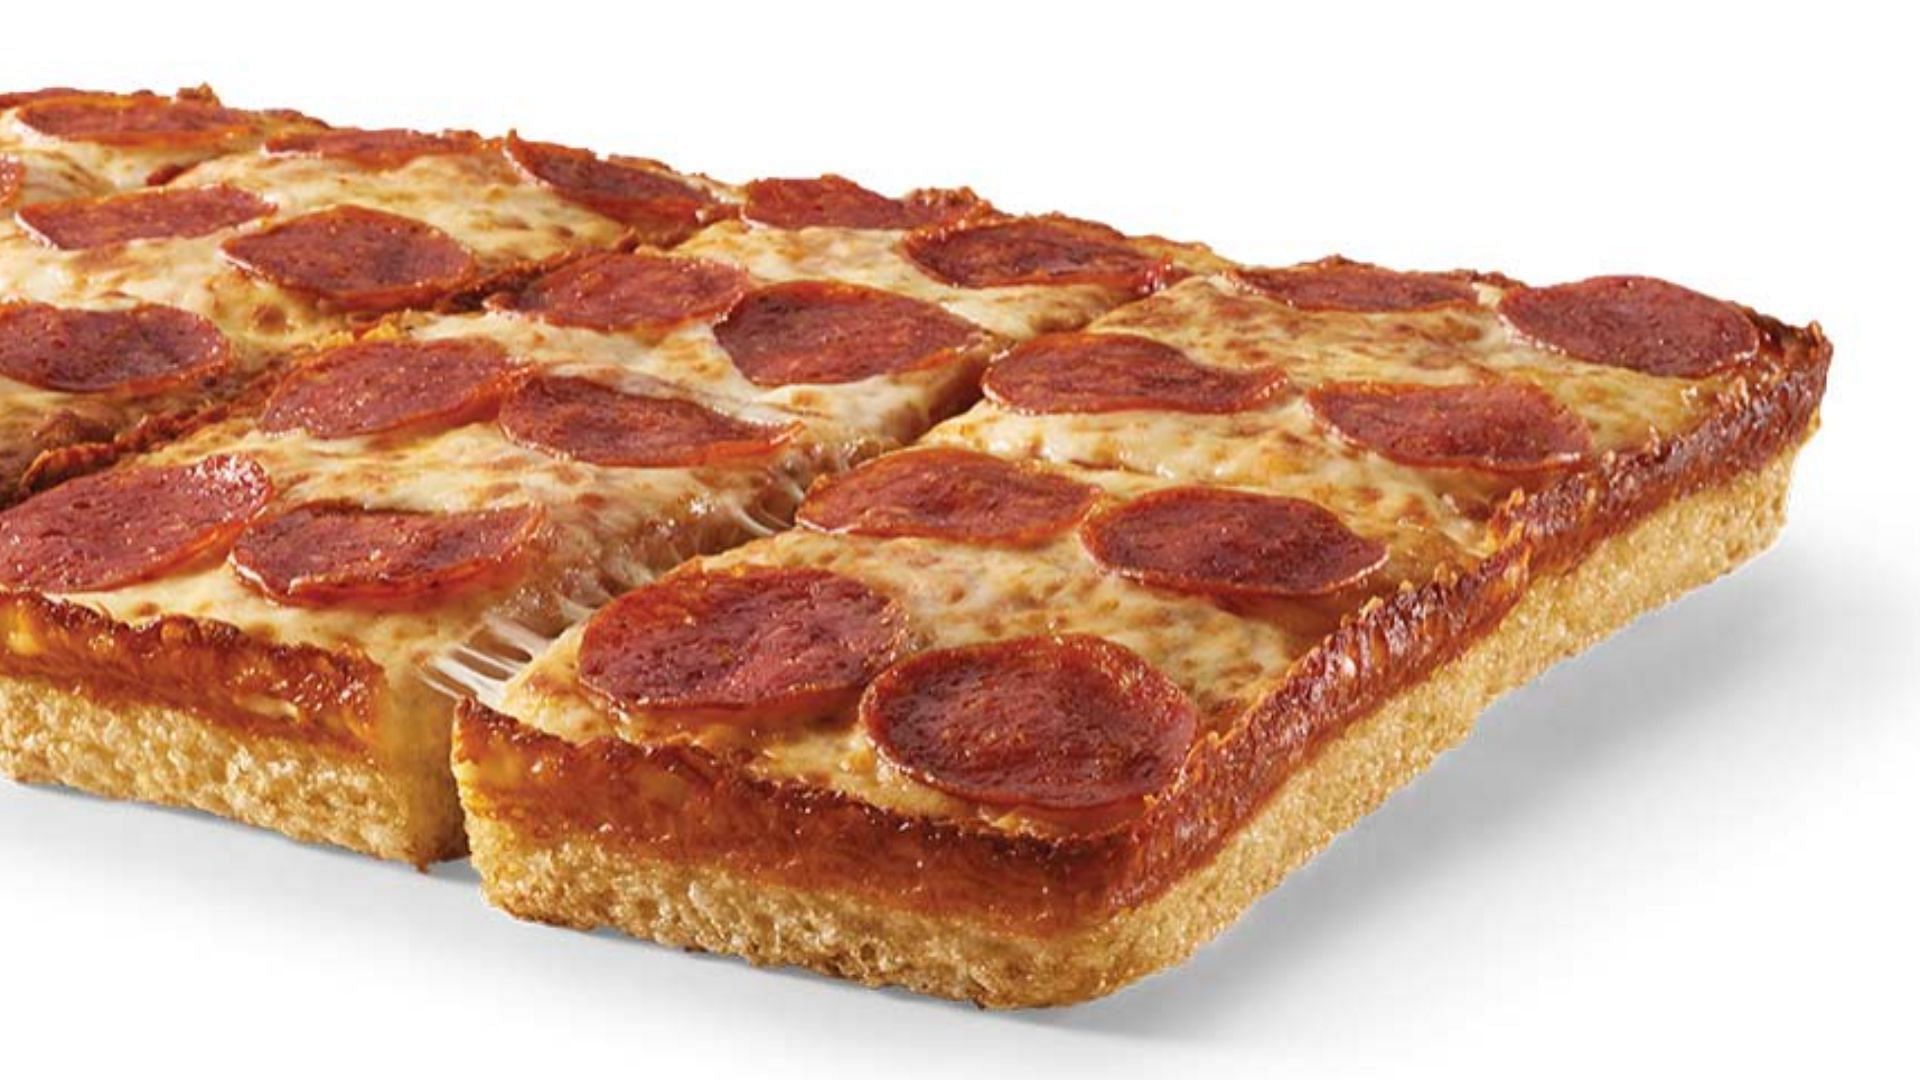 Detroit-Style Deep Dish pizza with spicy Pepperoni toppings (Image via Little Caesars)